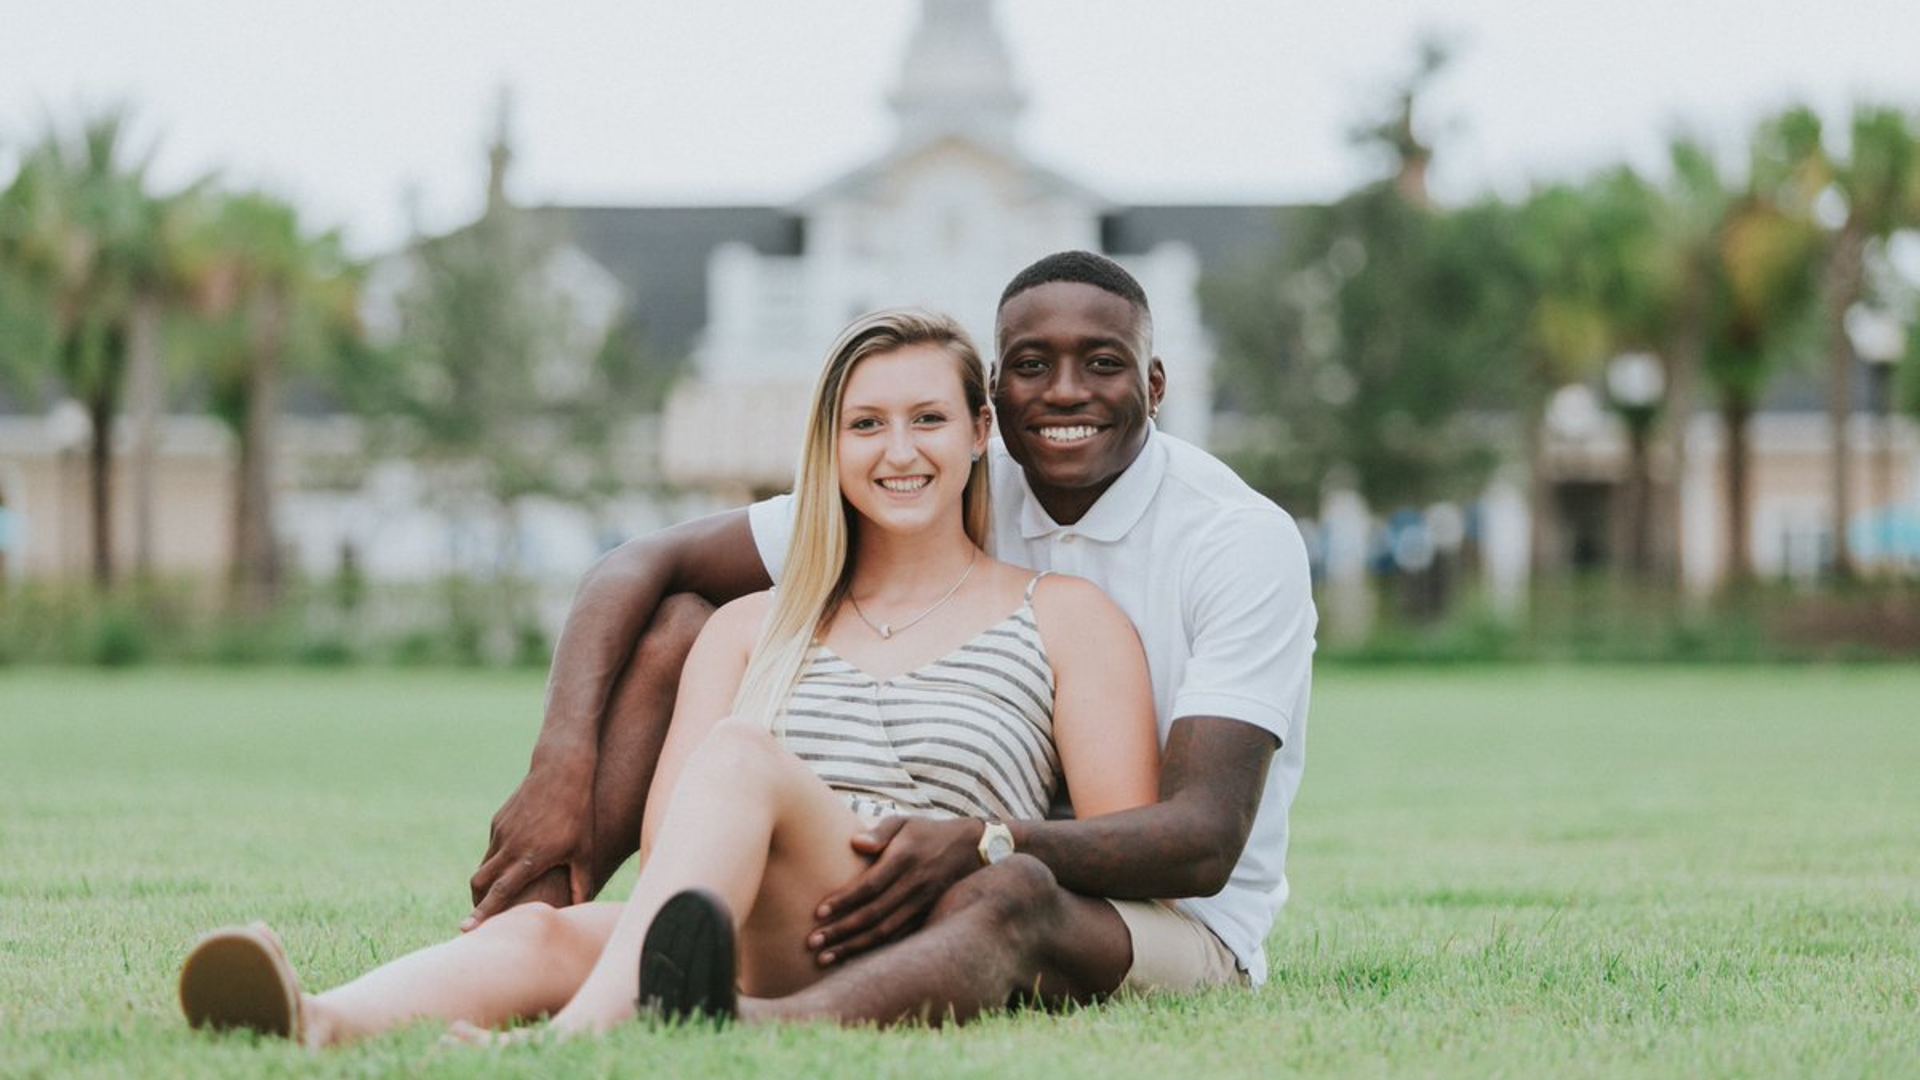 Who is Grant Holloway's girlfriend, Katie Chronister? Know everything